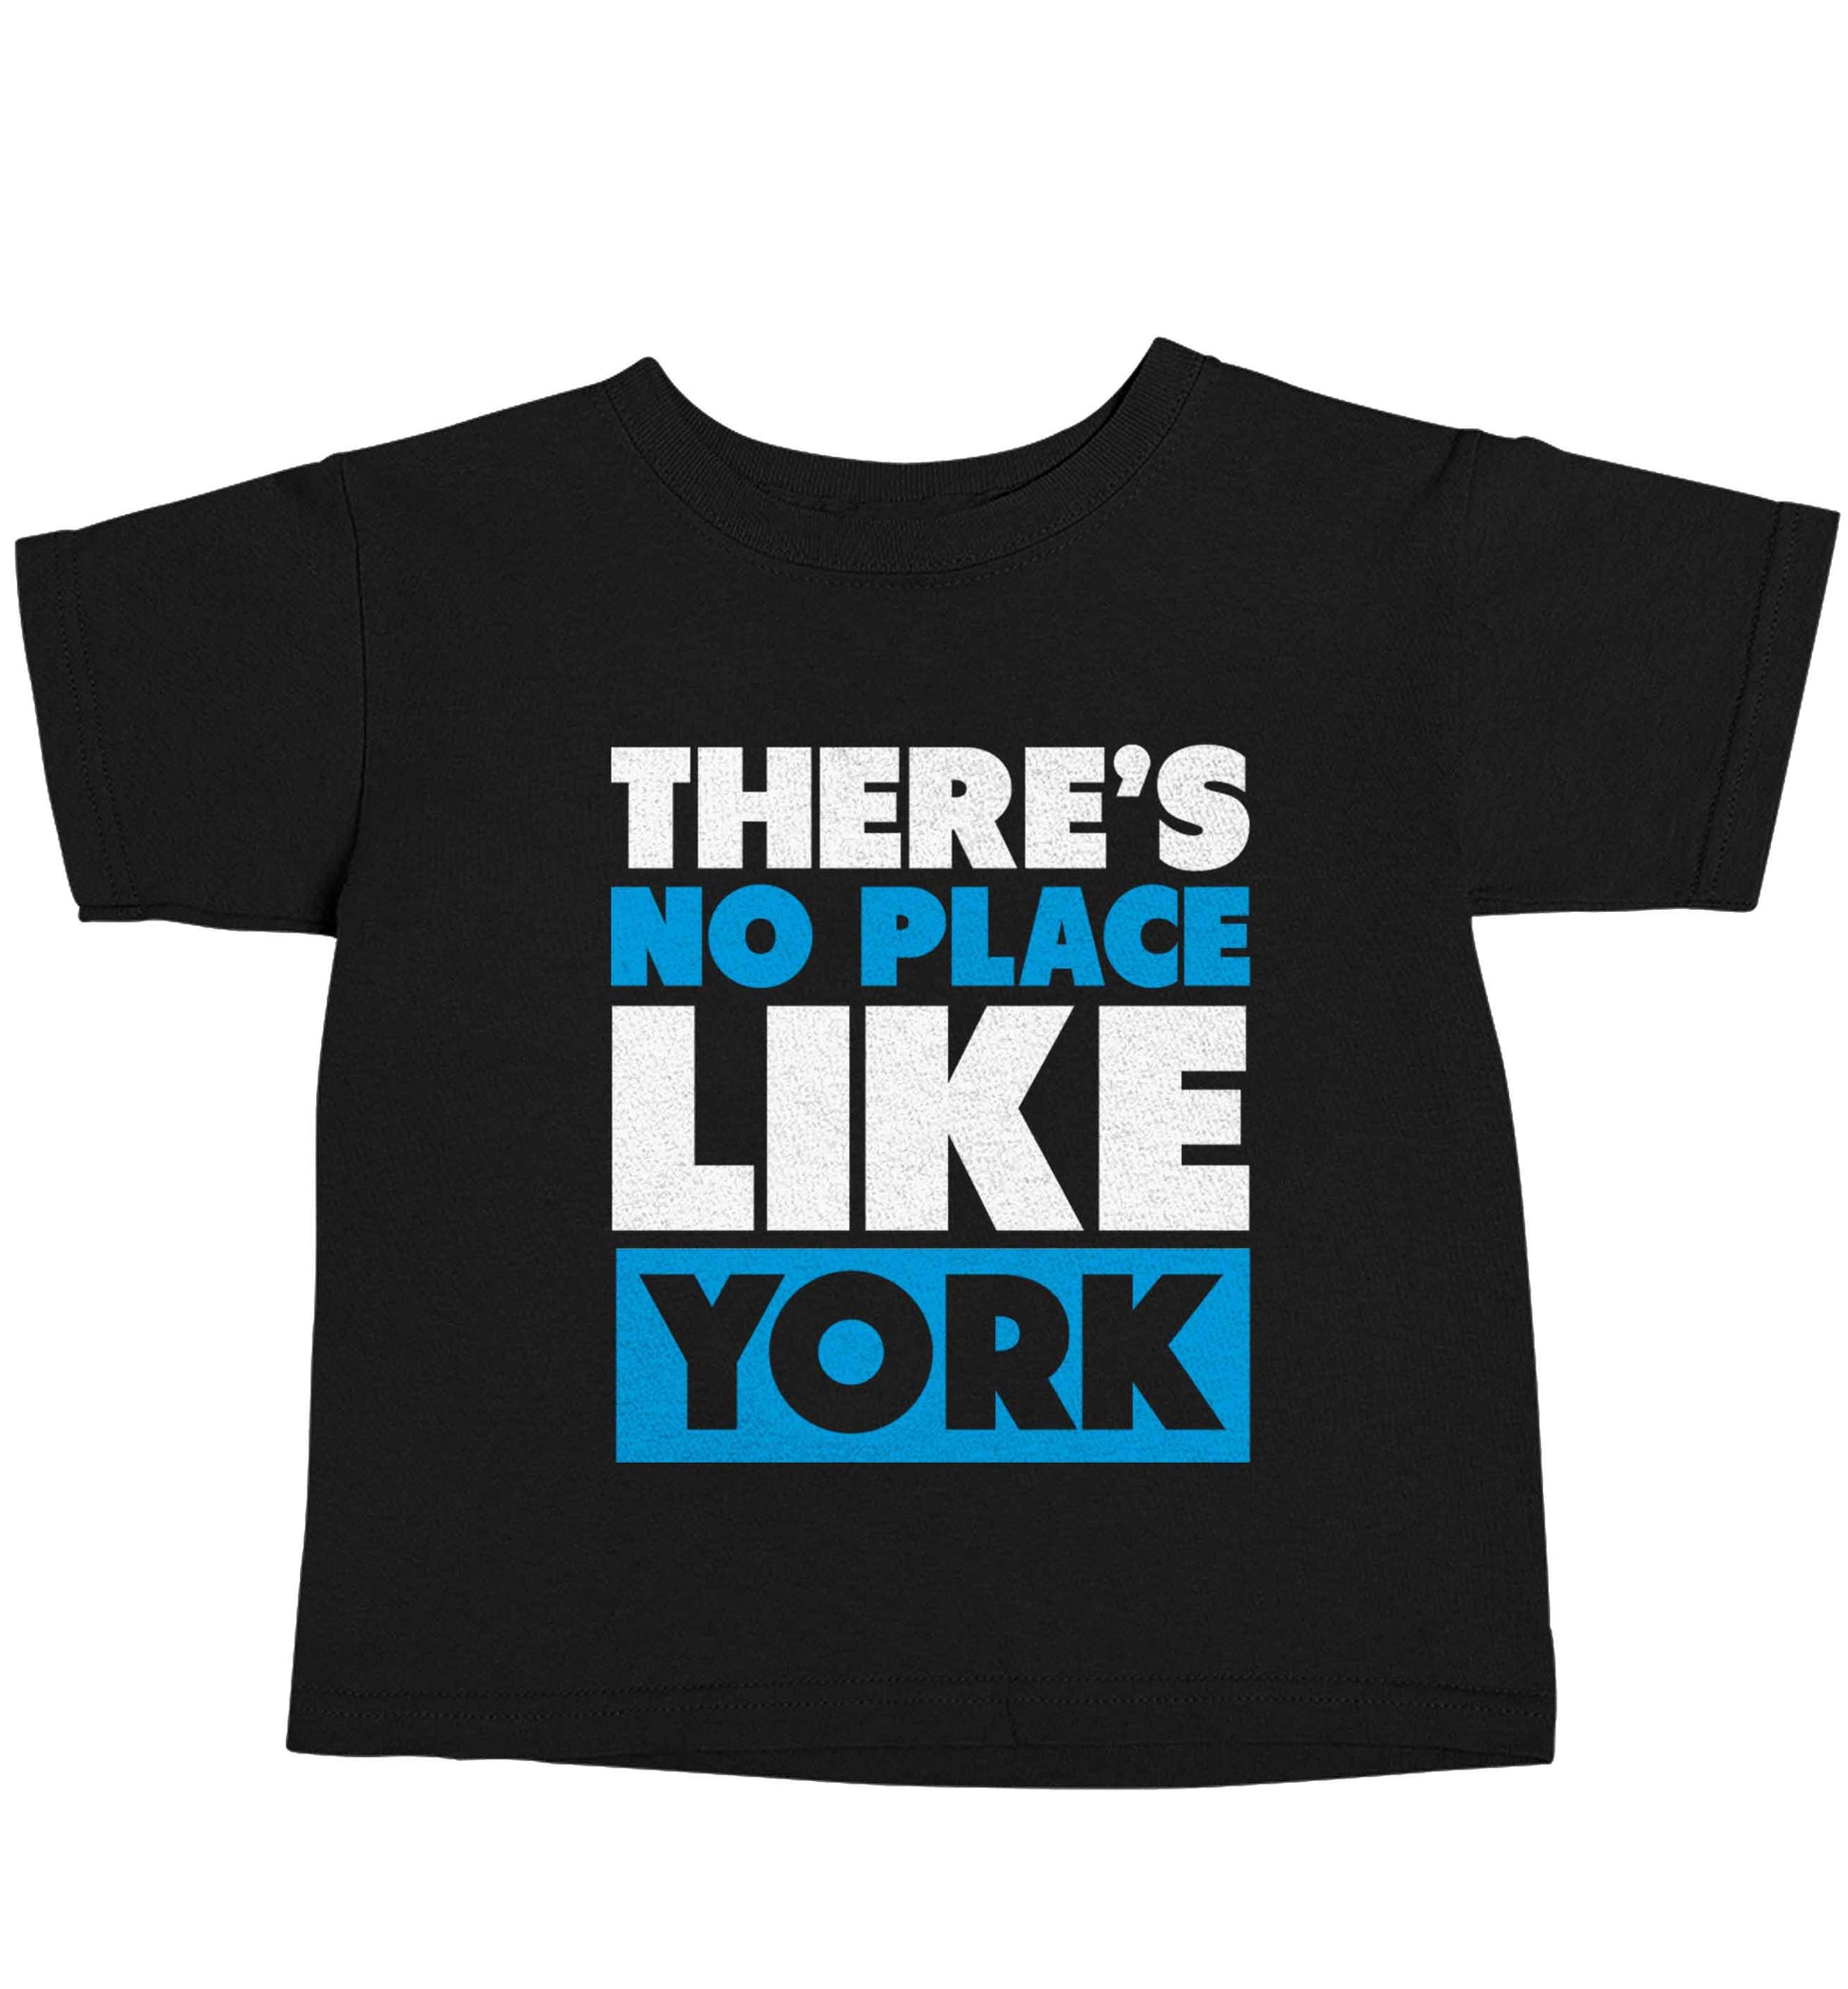 There's no place like york Black baby toddler Tshirt 2 years